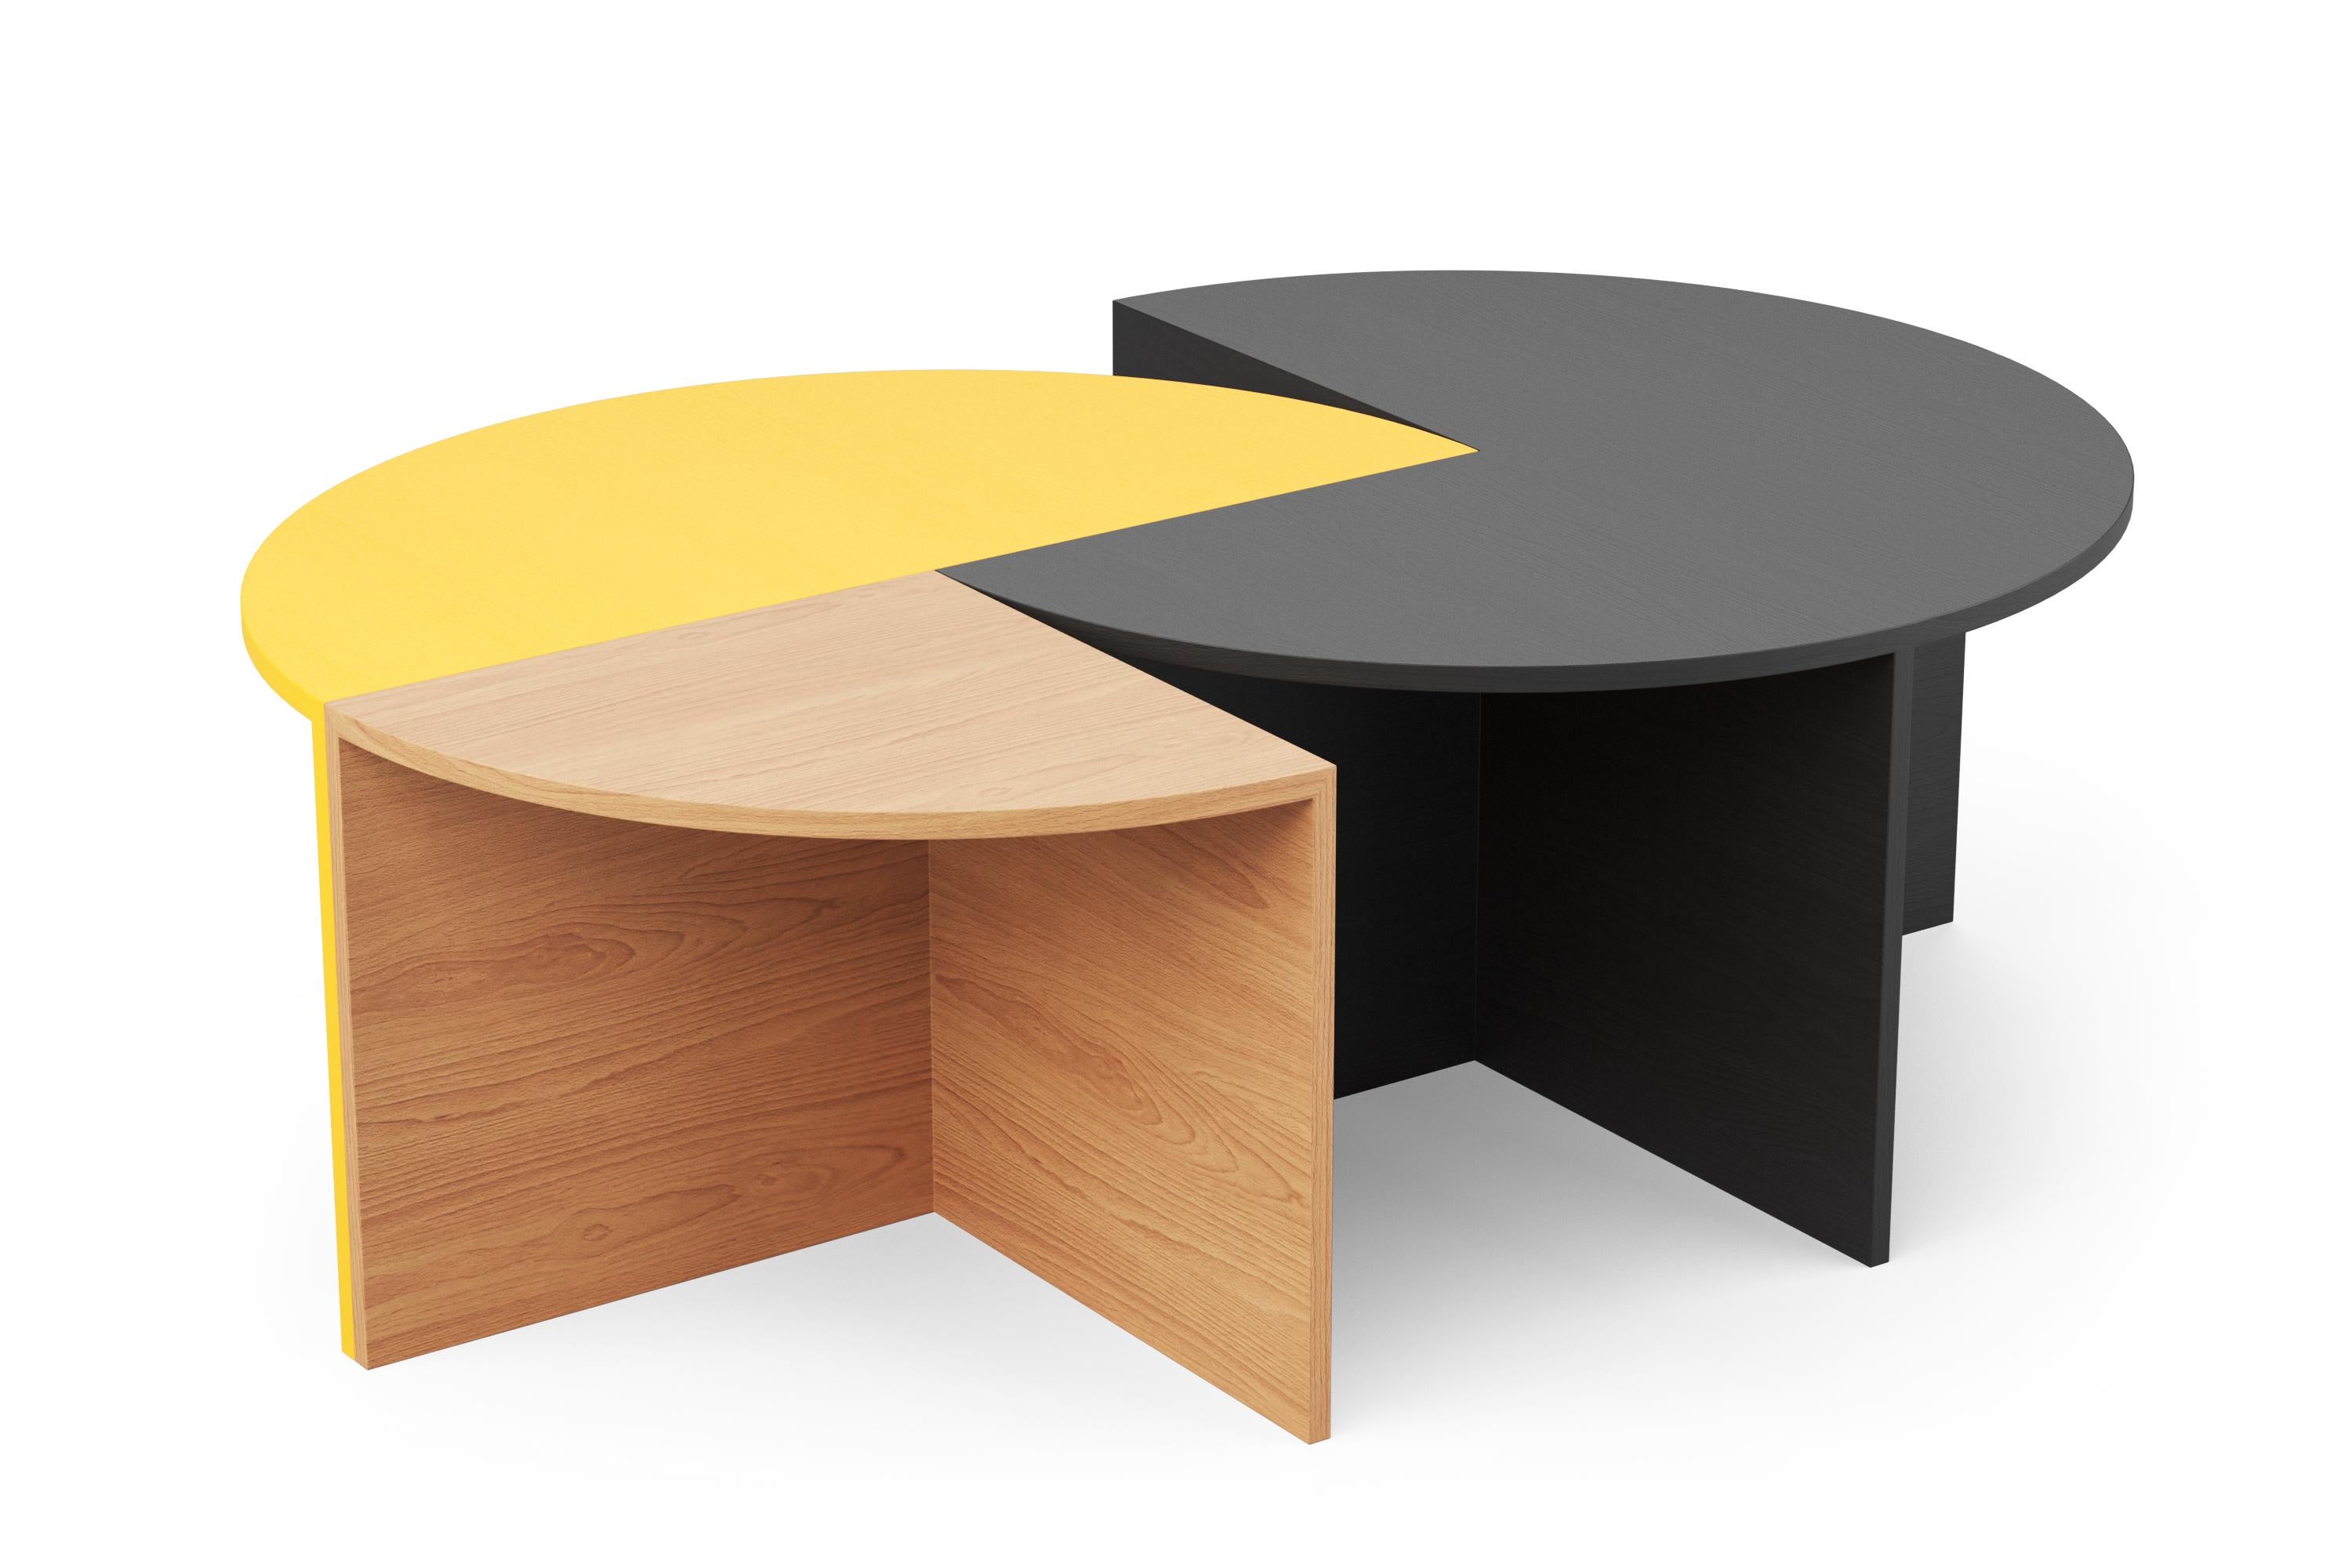 This is an ingenious modular side- or coffee-table system that can be built up from three different units: a quarter circle, a half circle and a three-quarter circle. The different modules are all compatible and can be combined together — making